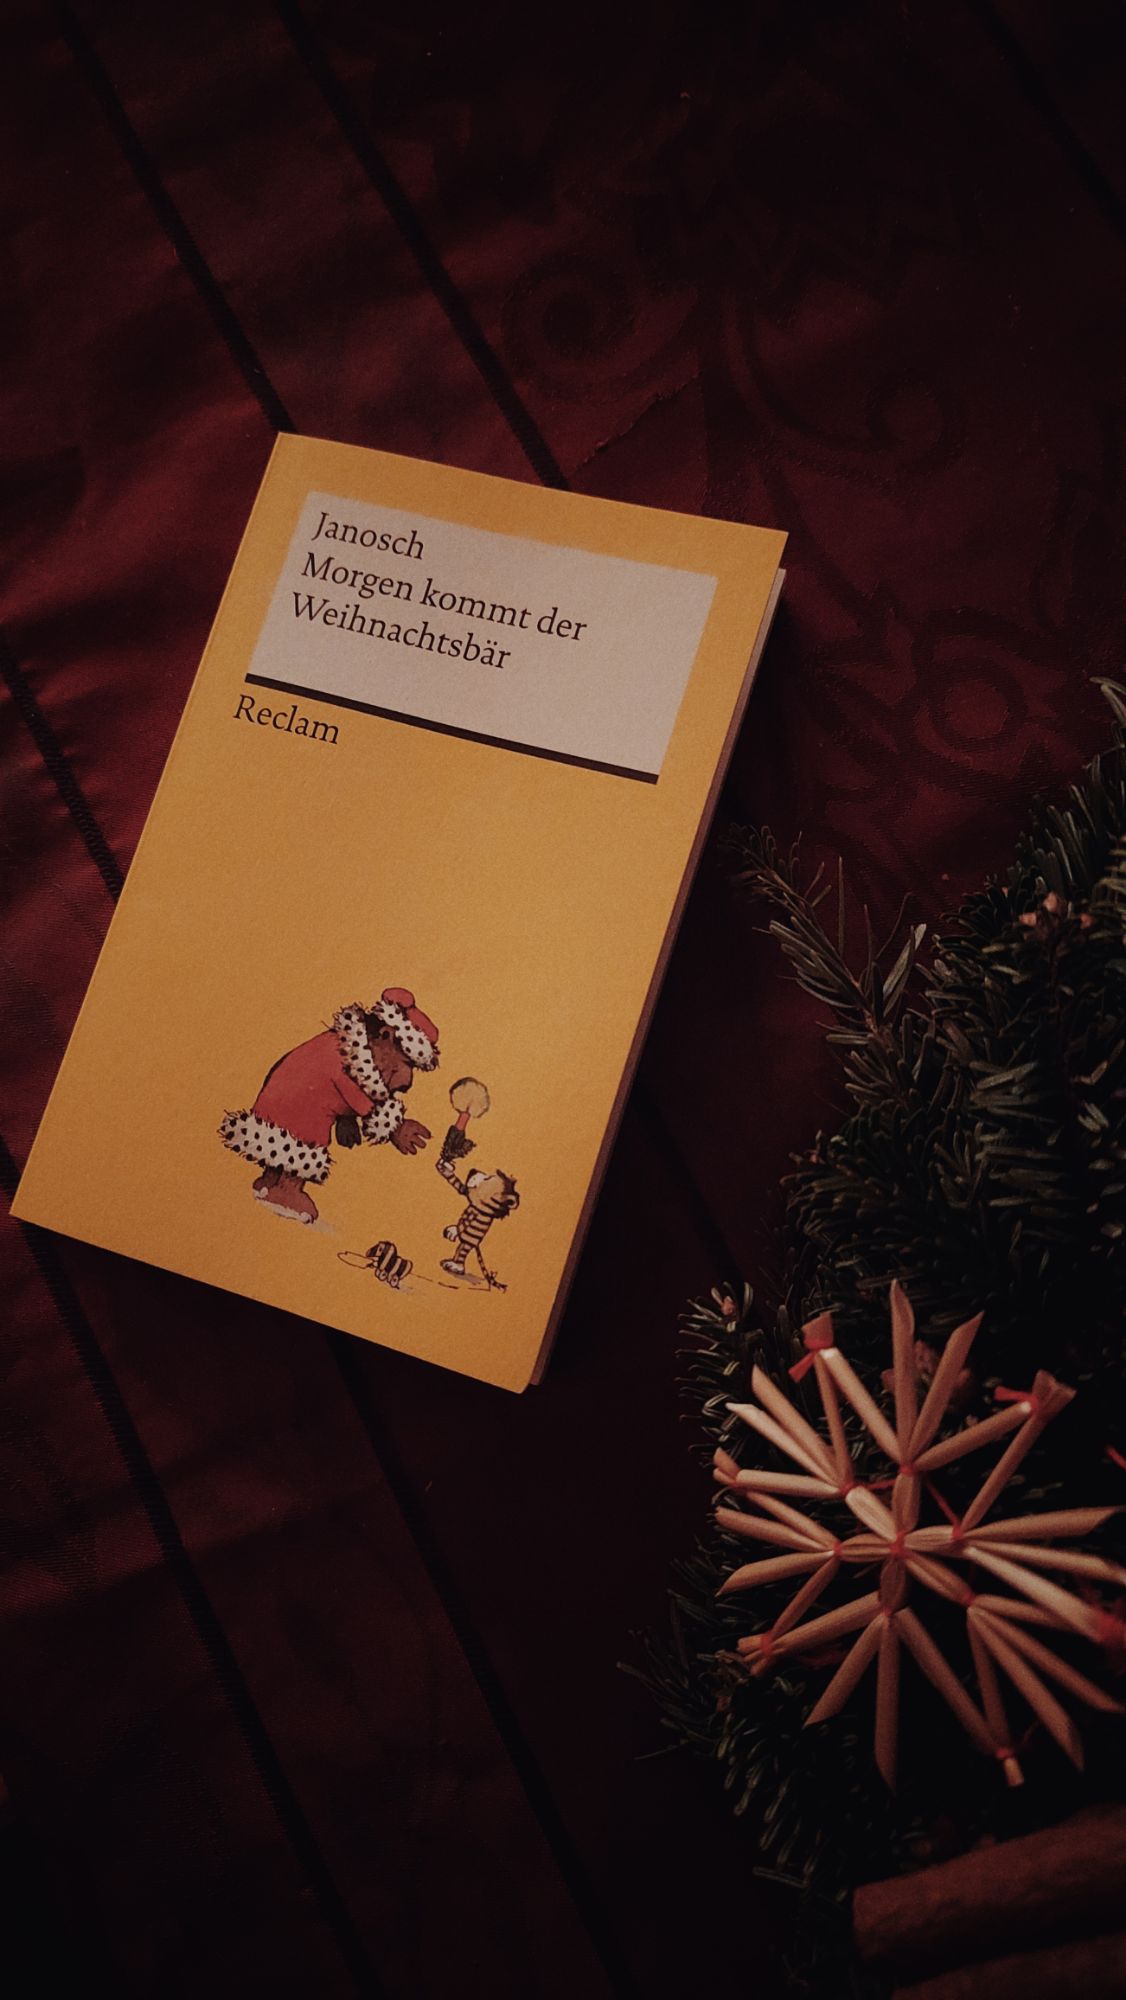 A copy of a Janosch christmas book on a red tablecloth, next to a straw star